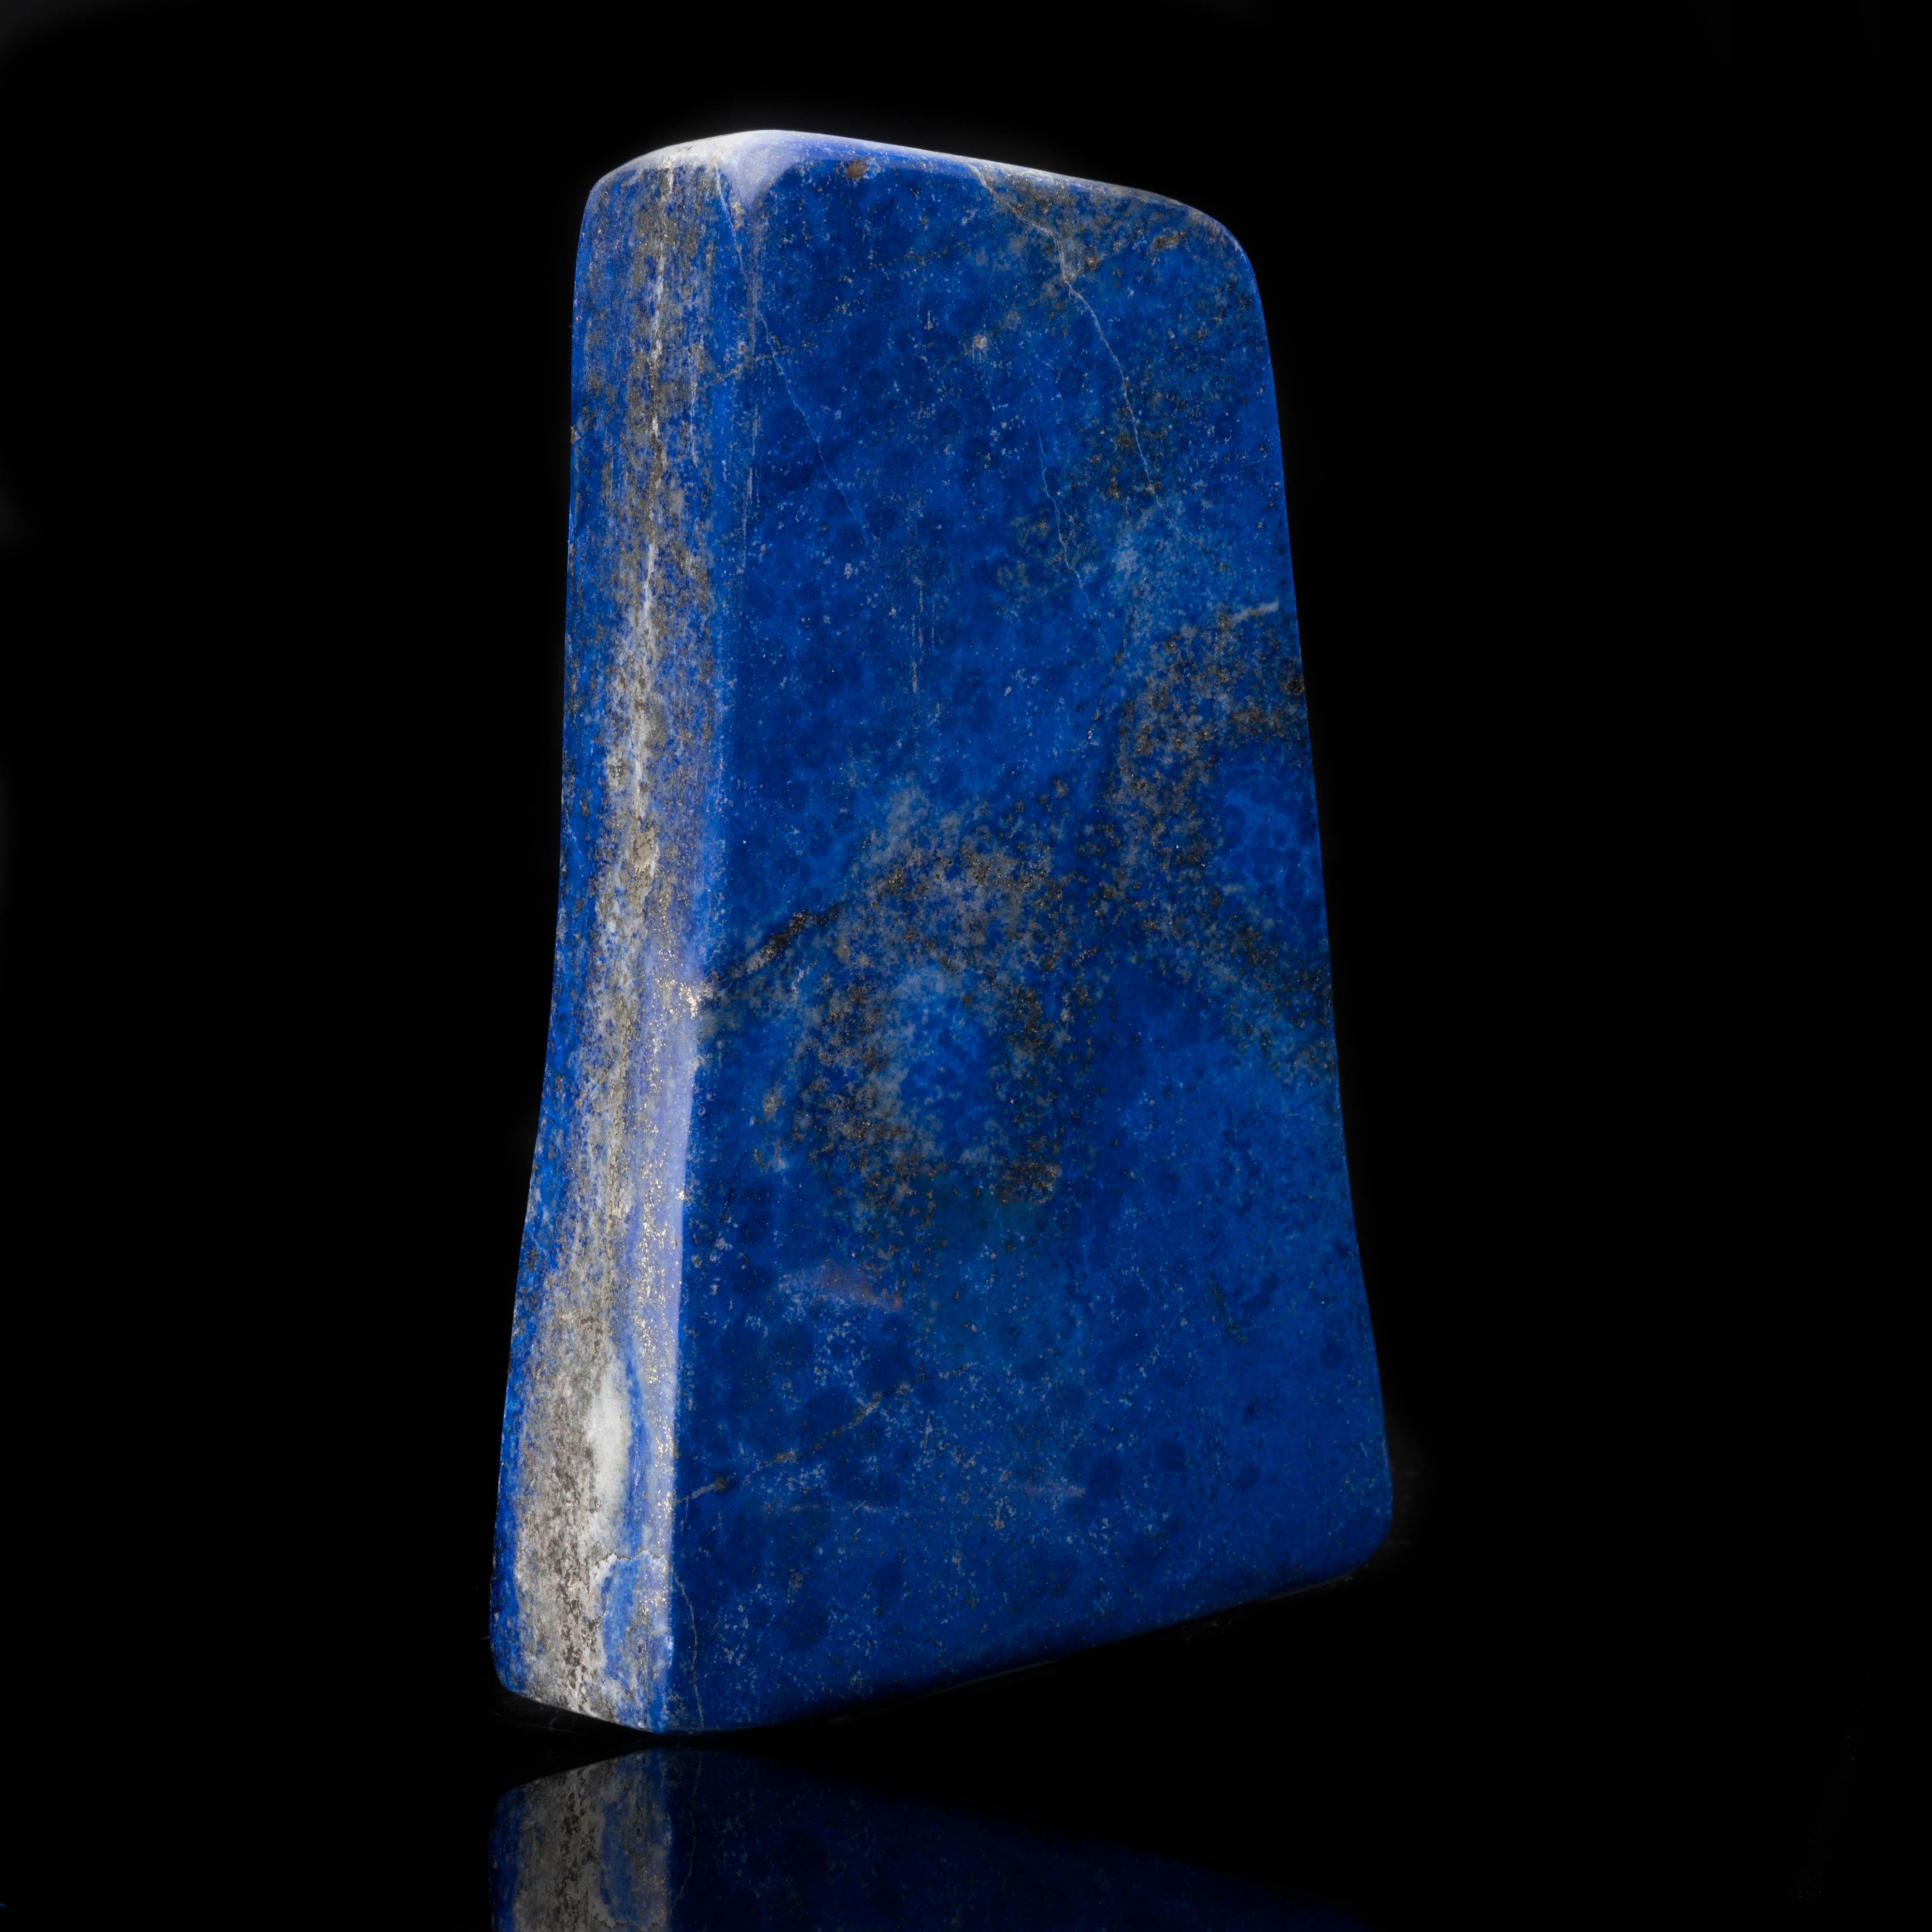 This beautiful cobalt blue freestanding lapis lazuli freeform has been hand-polished and features shimmering golden pyrite deposits and contrasting veins of white calcite running throughout. A handsome addition to any collection.